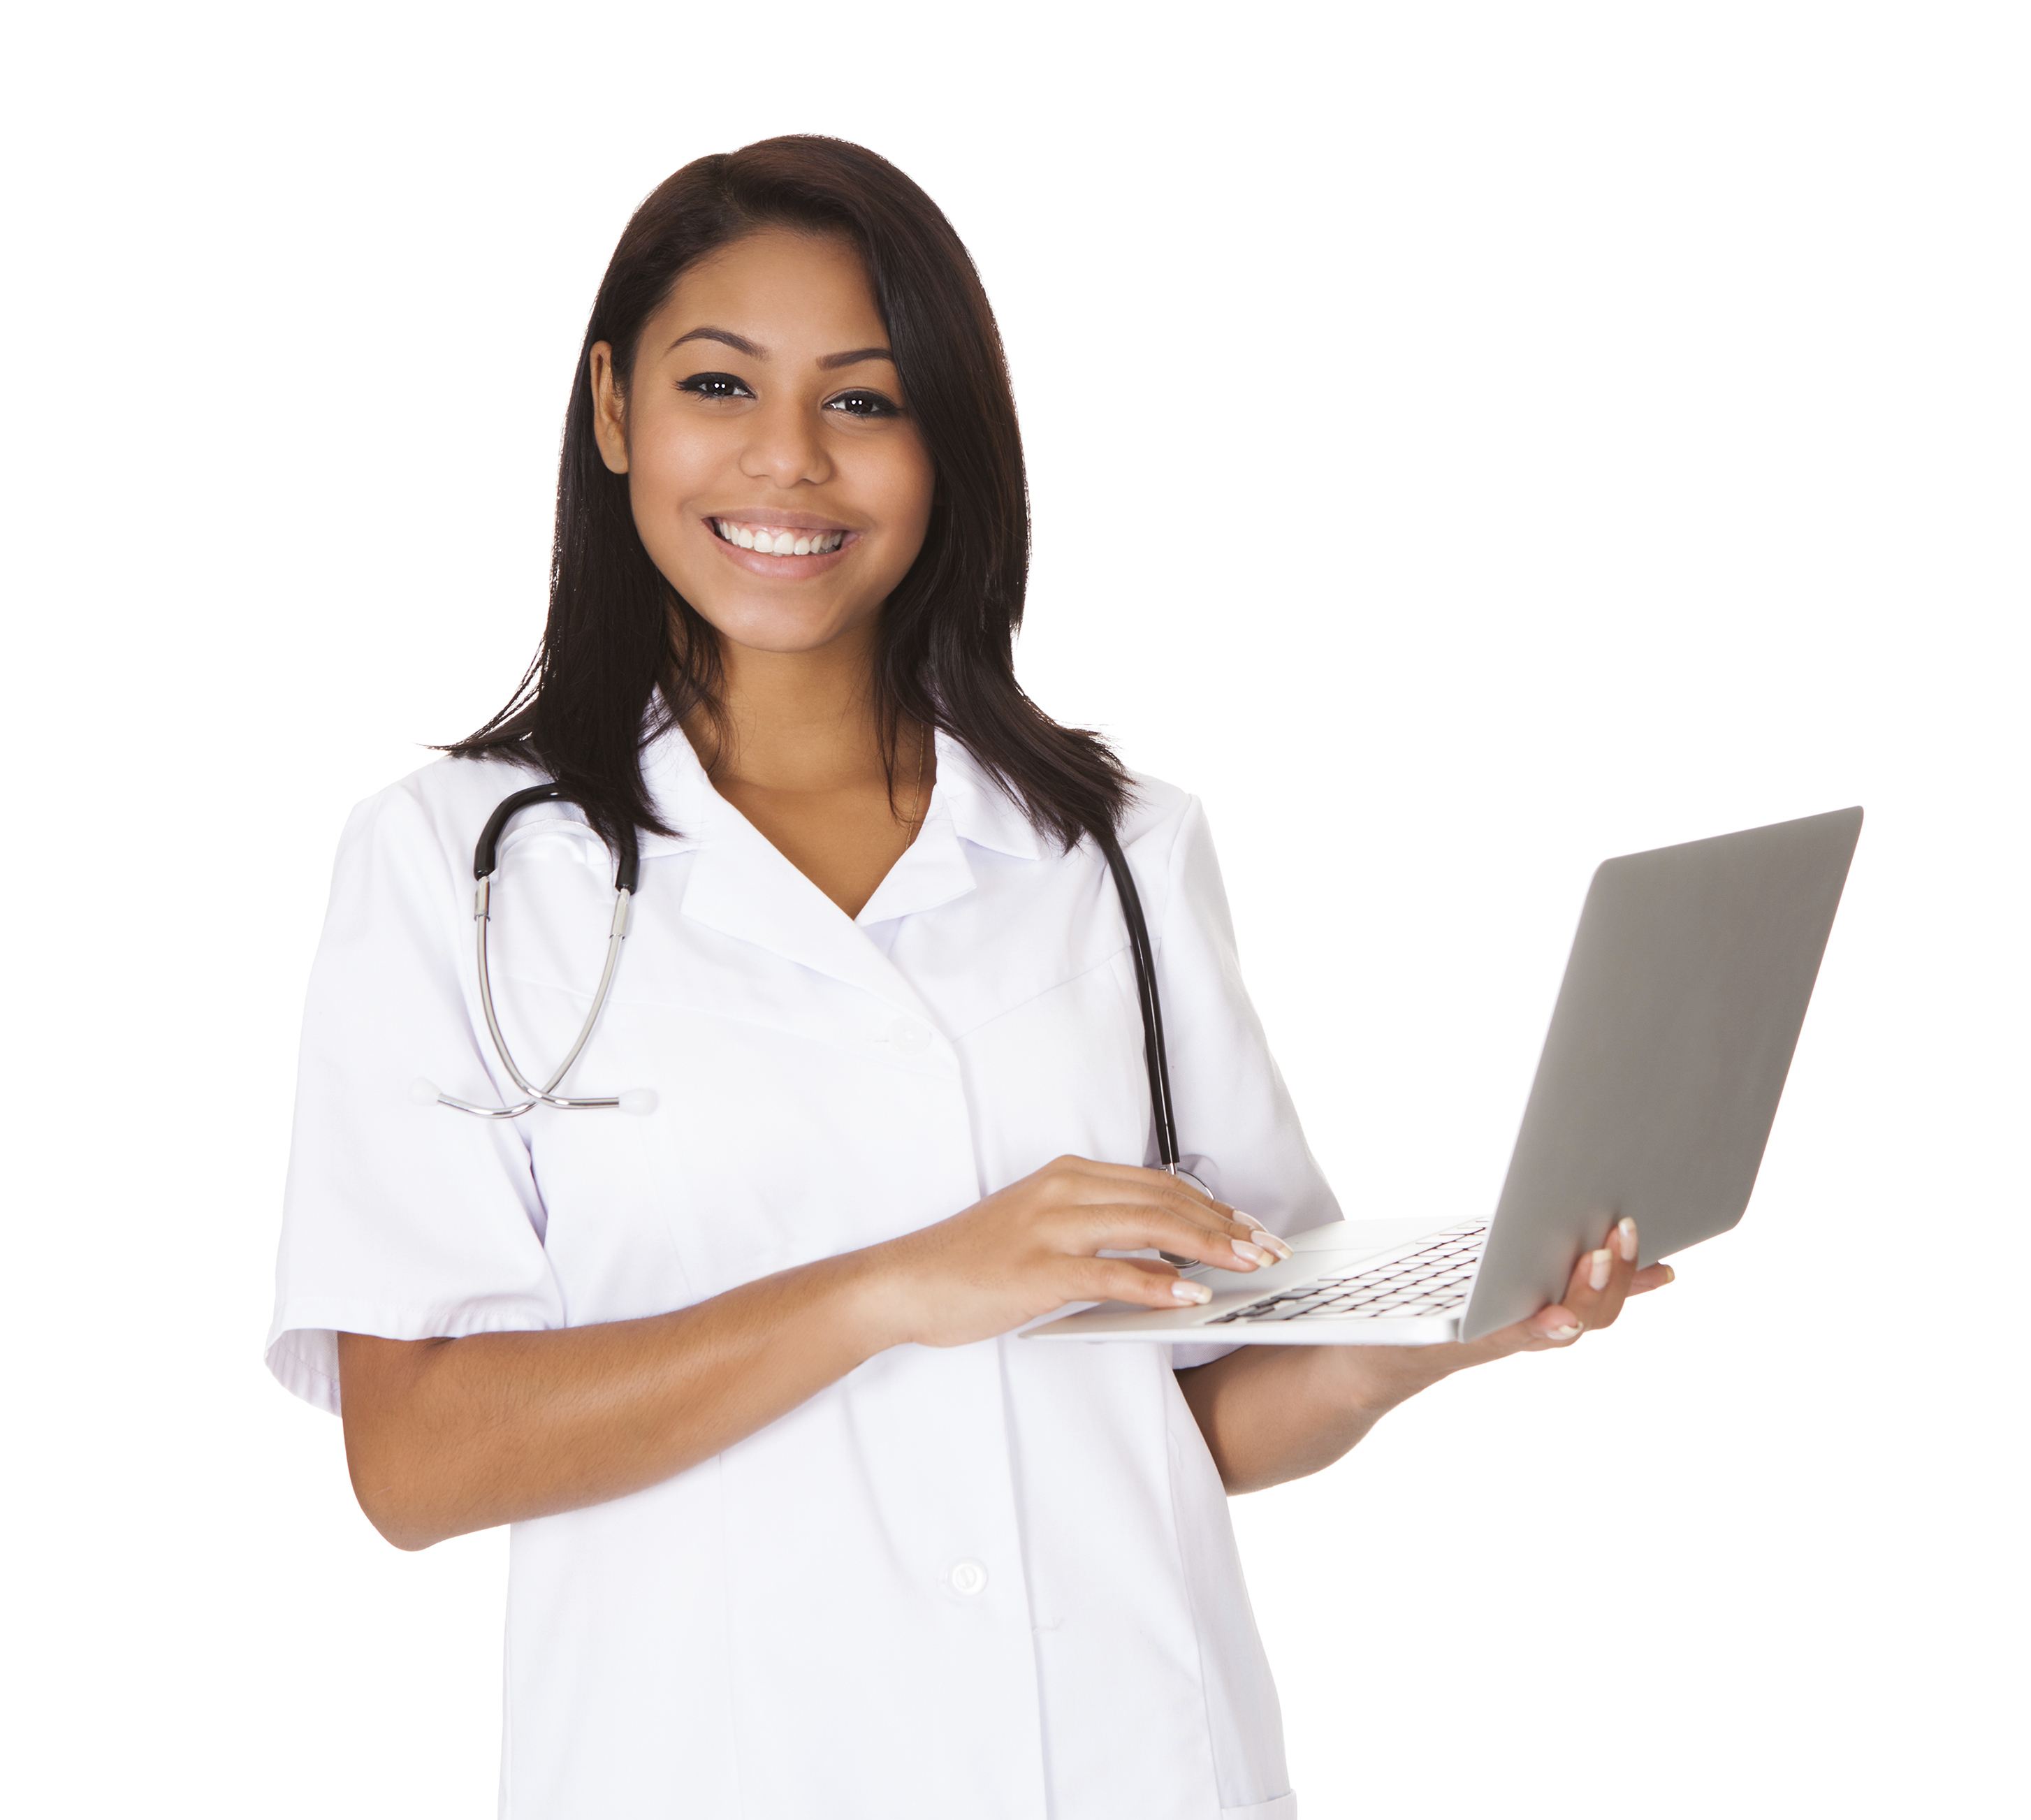 The Trend of Telehealth Nursing: Remotely Supporting Patients